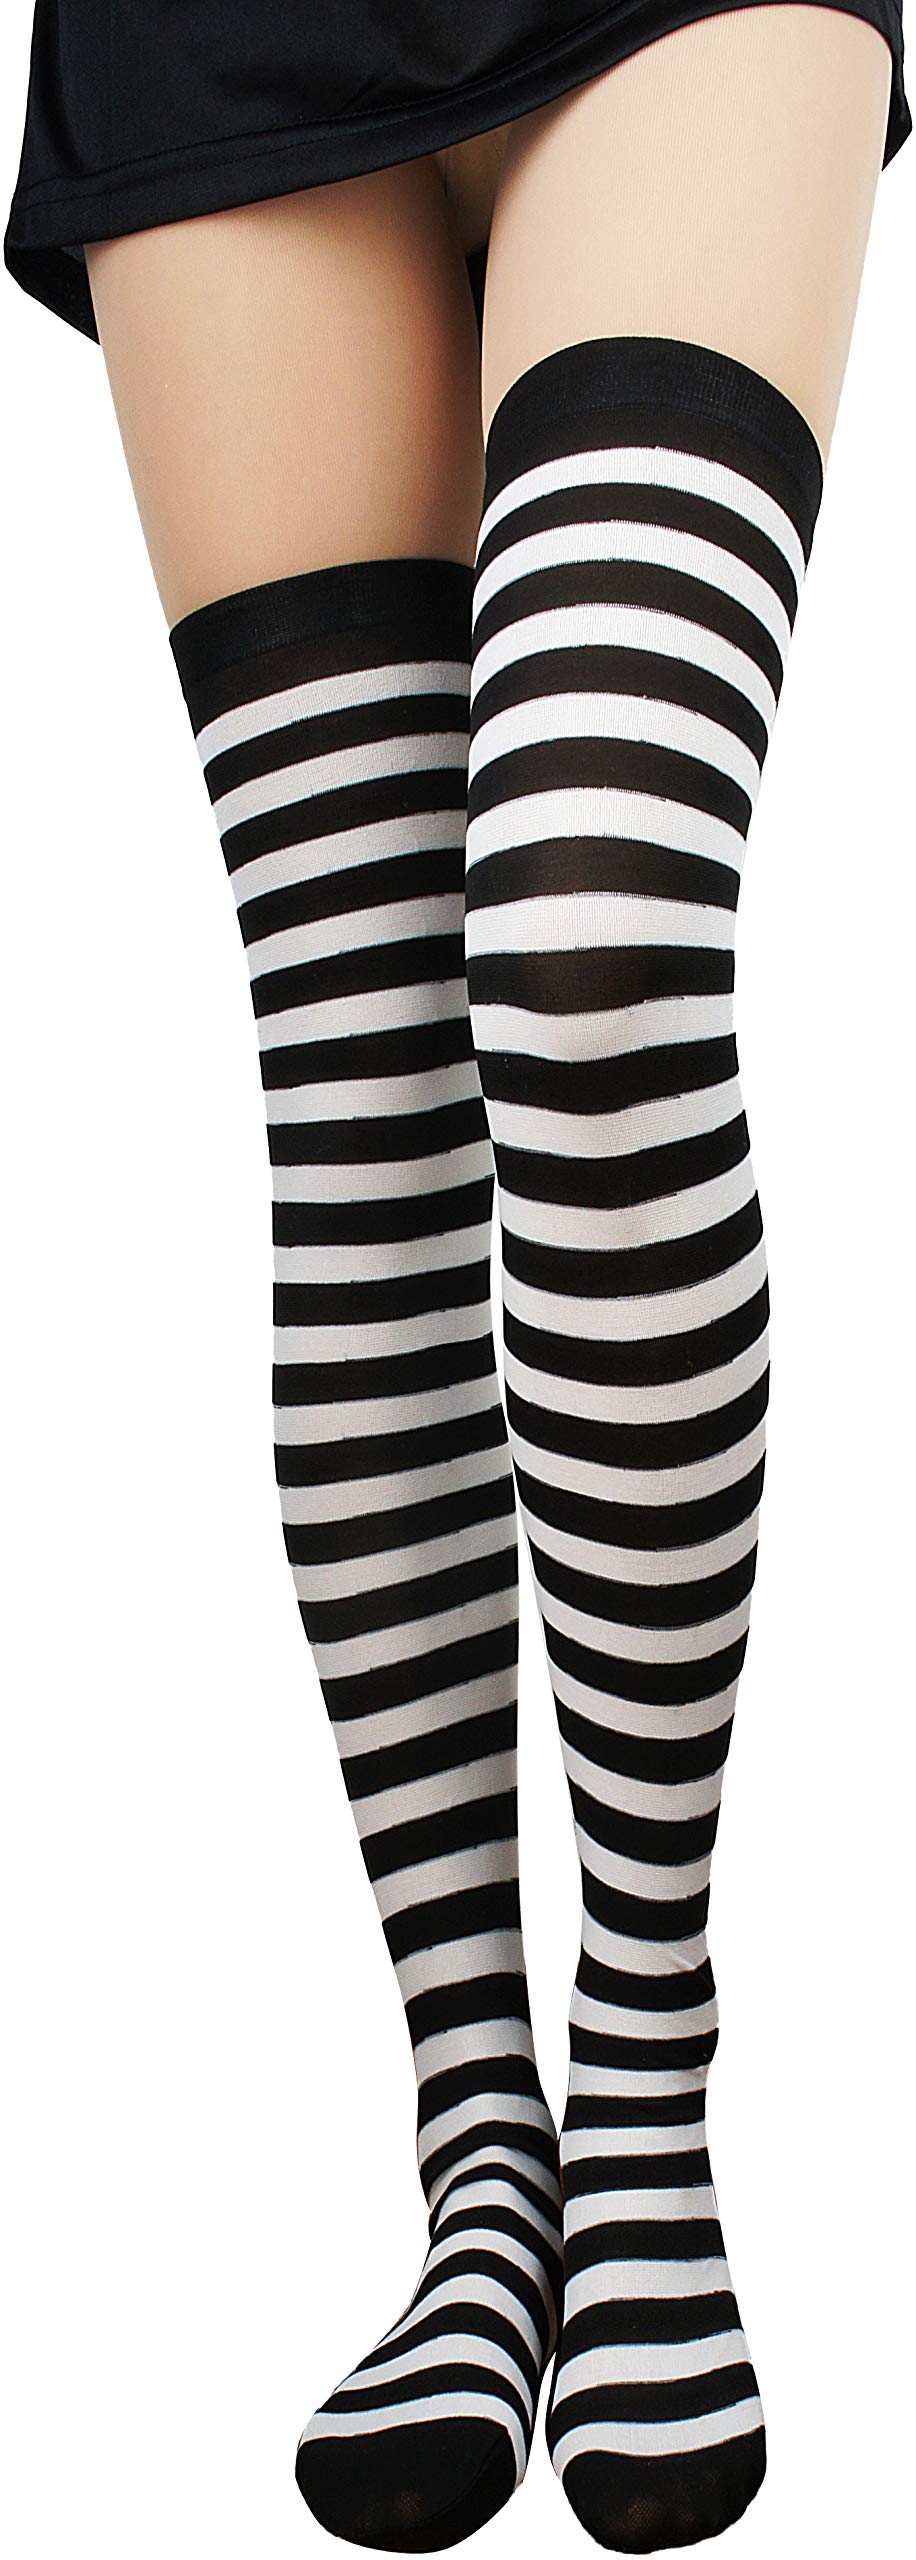 Women's Extra Long Striped Socks Over Knee High Opaque Stockings